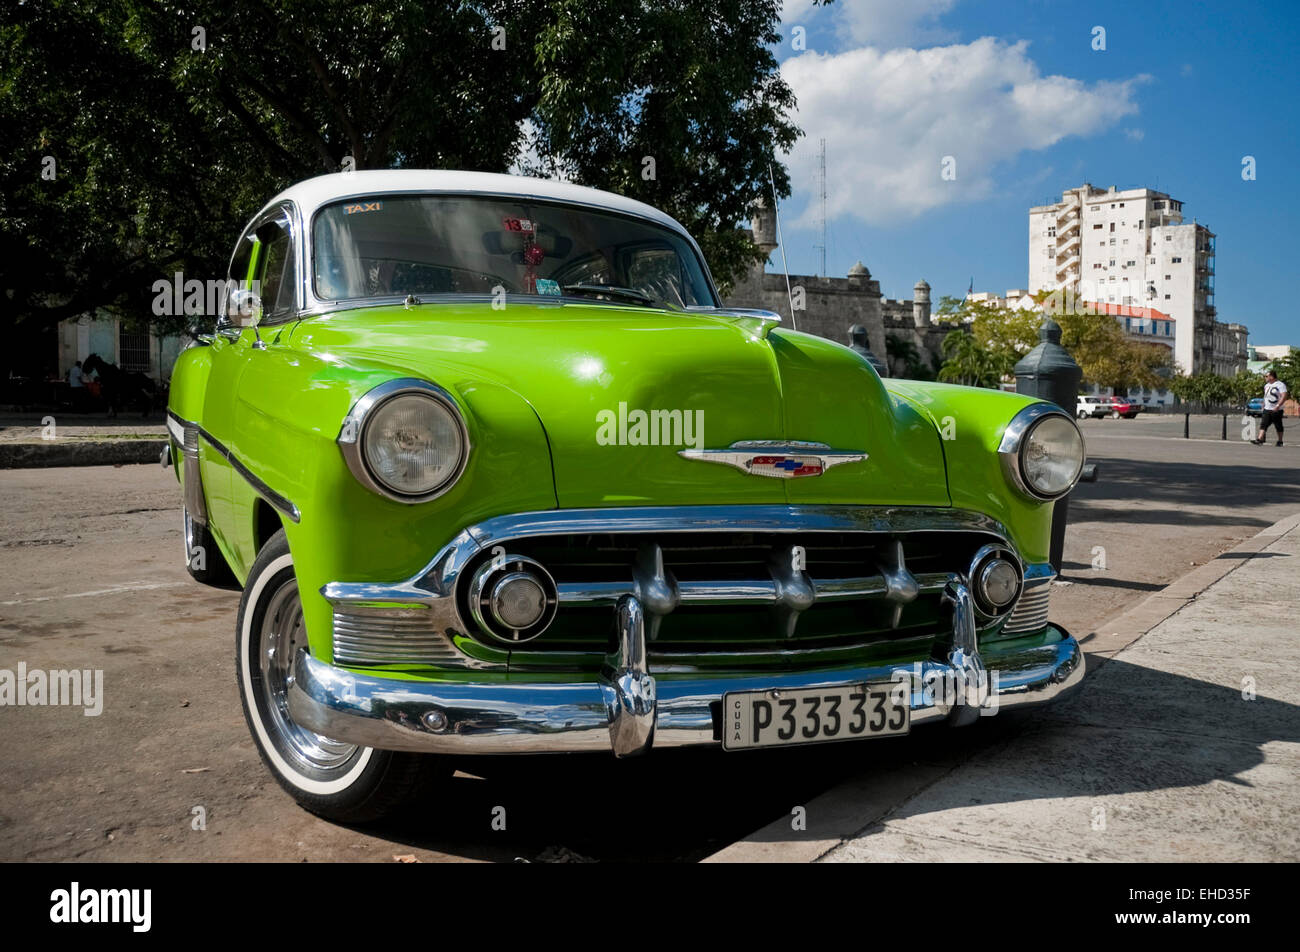 Horizontal close up view of a vintage American car in Cuba. Stock Photo